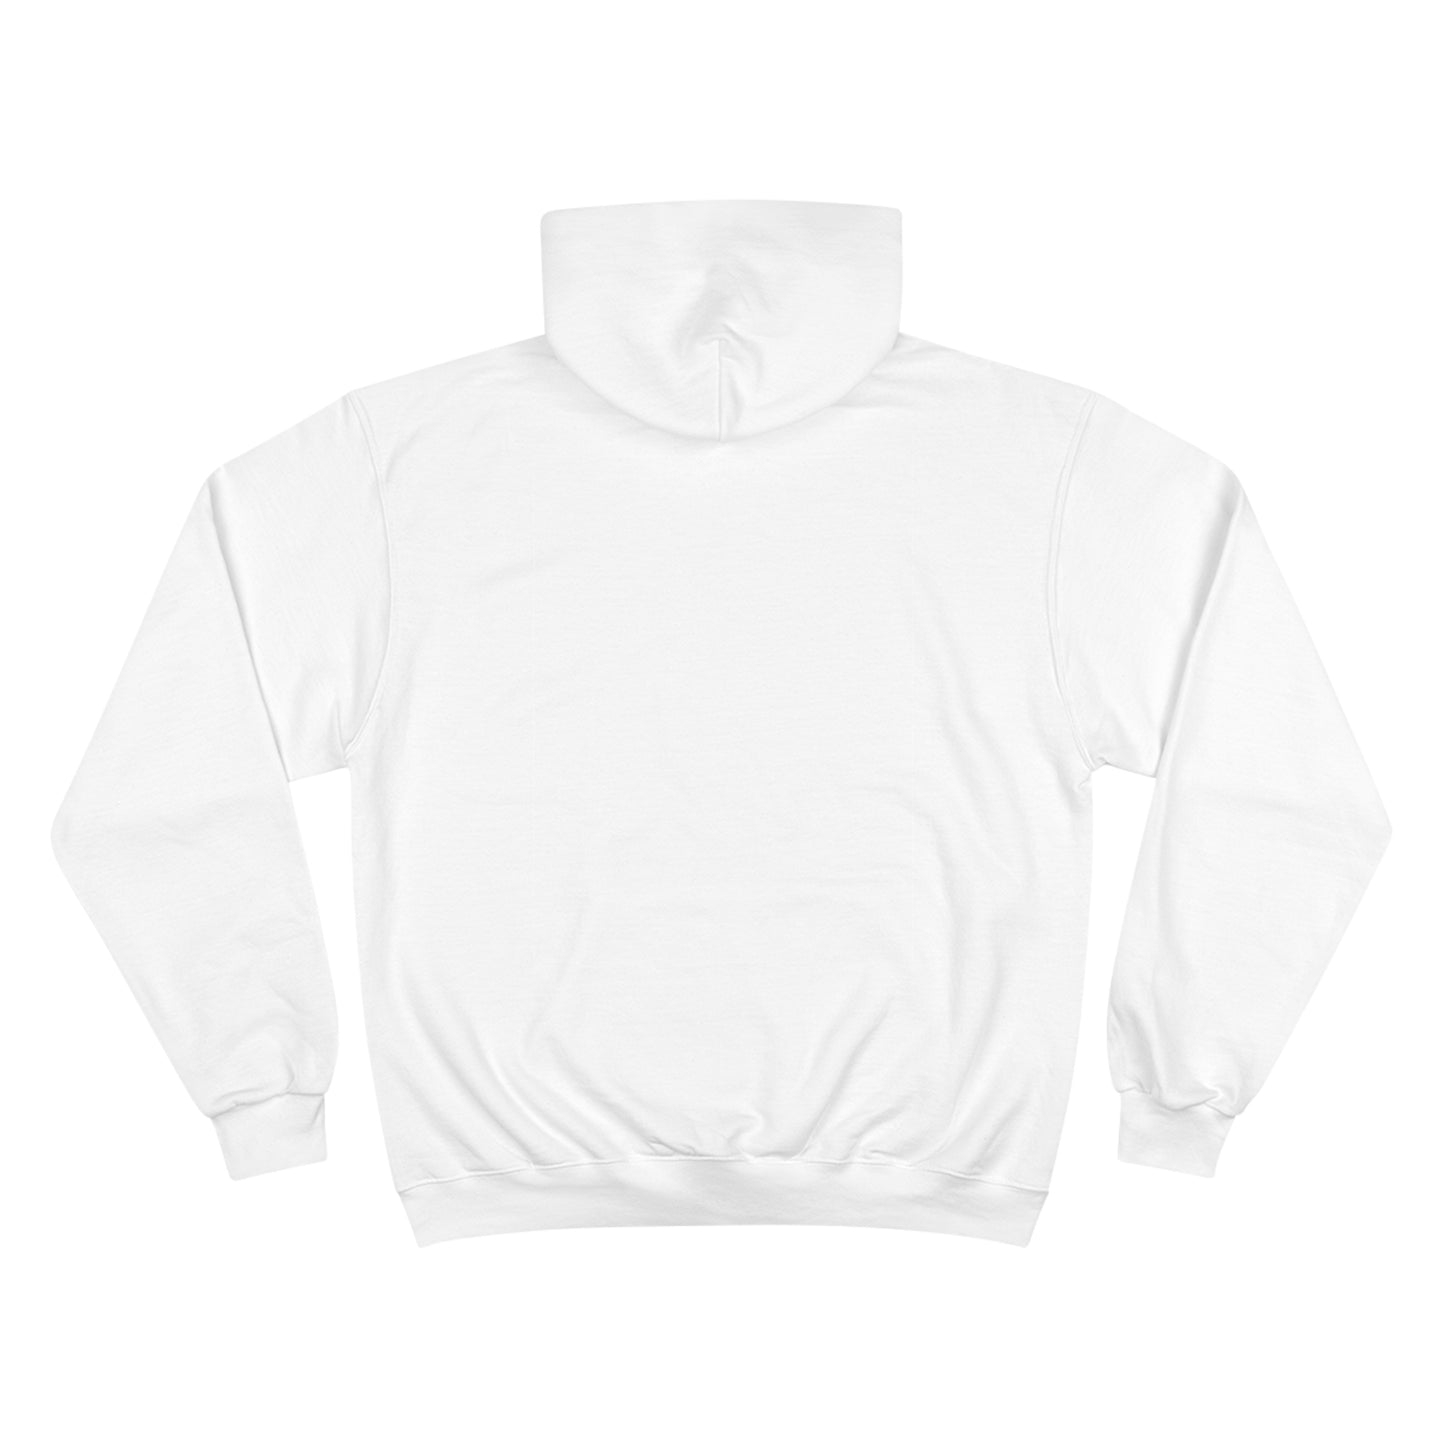 Divinely Inspired Purposefully Created Unisex Champion Hoodie